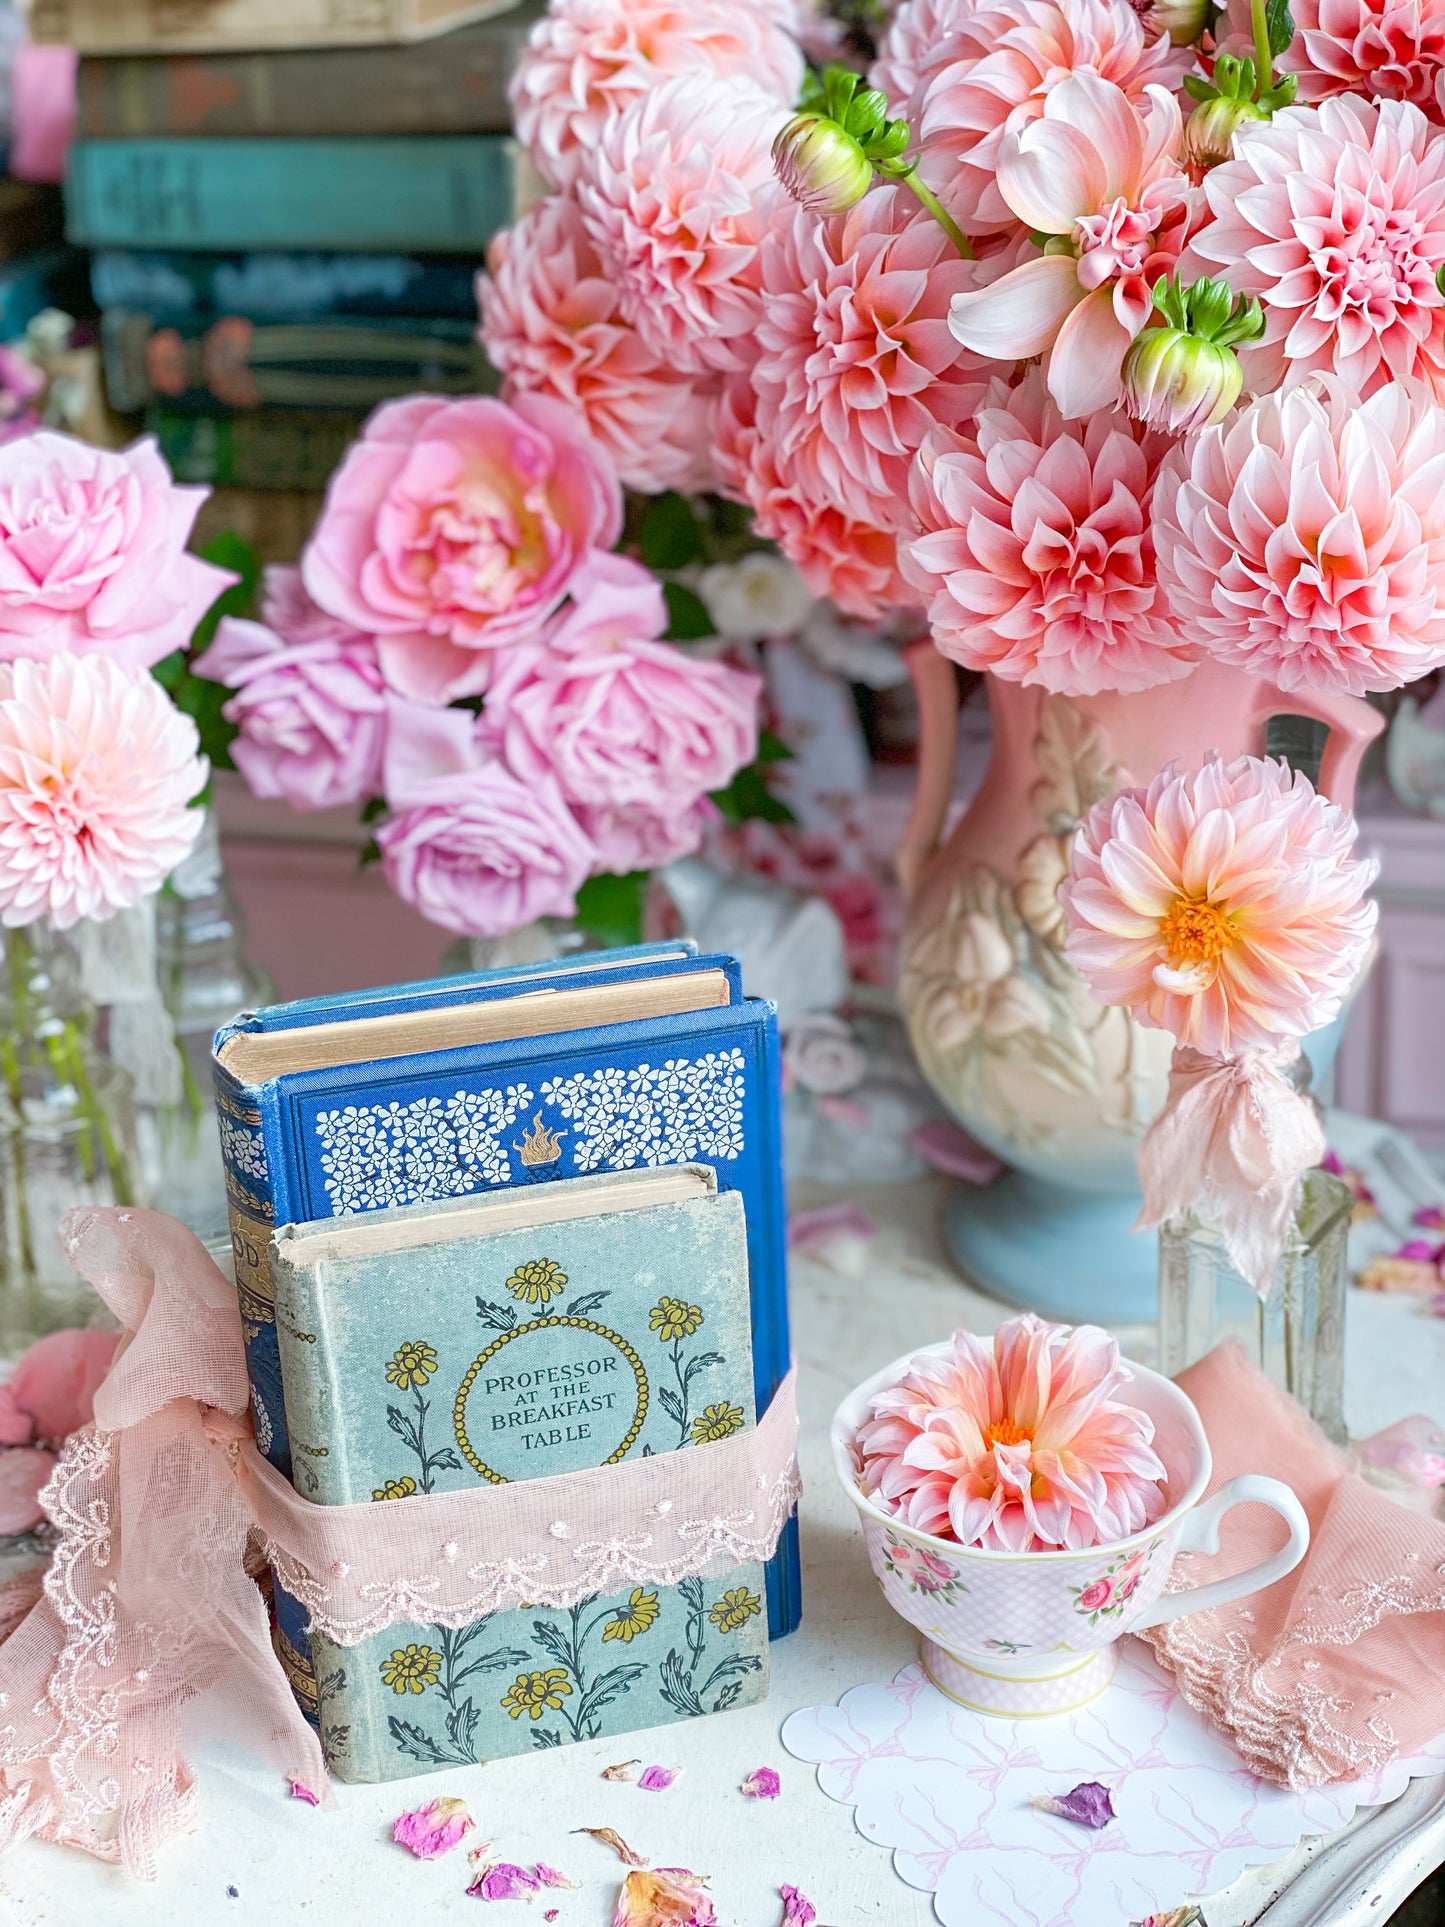 Set of 3 Blue Books with Floral Spines Wrapped in Vintage Blush Pink Ribbon